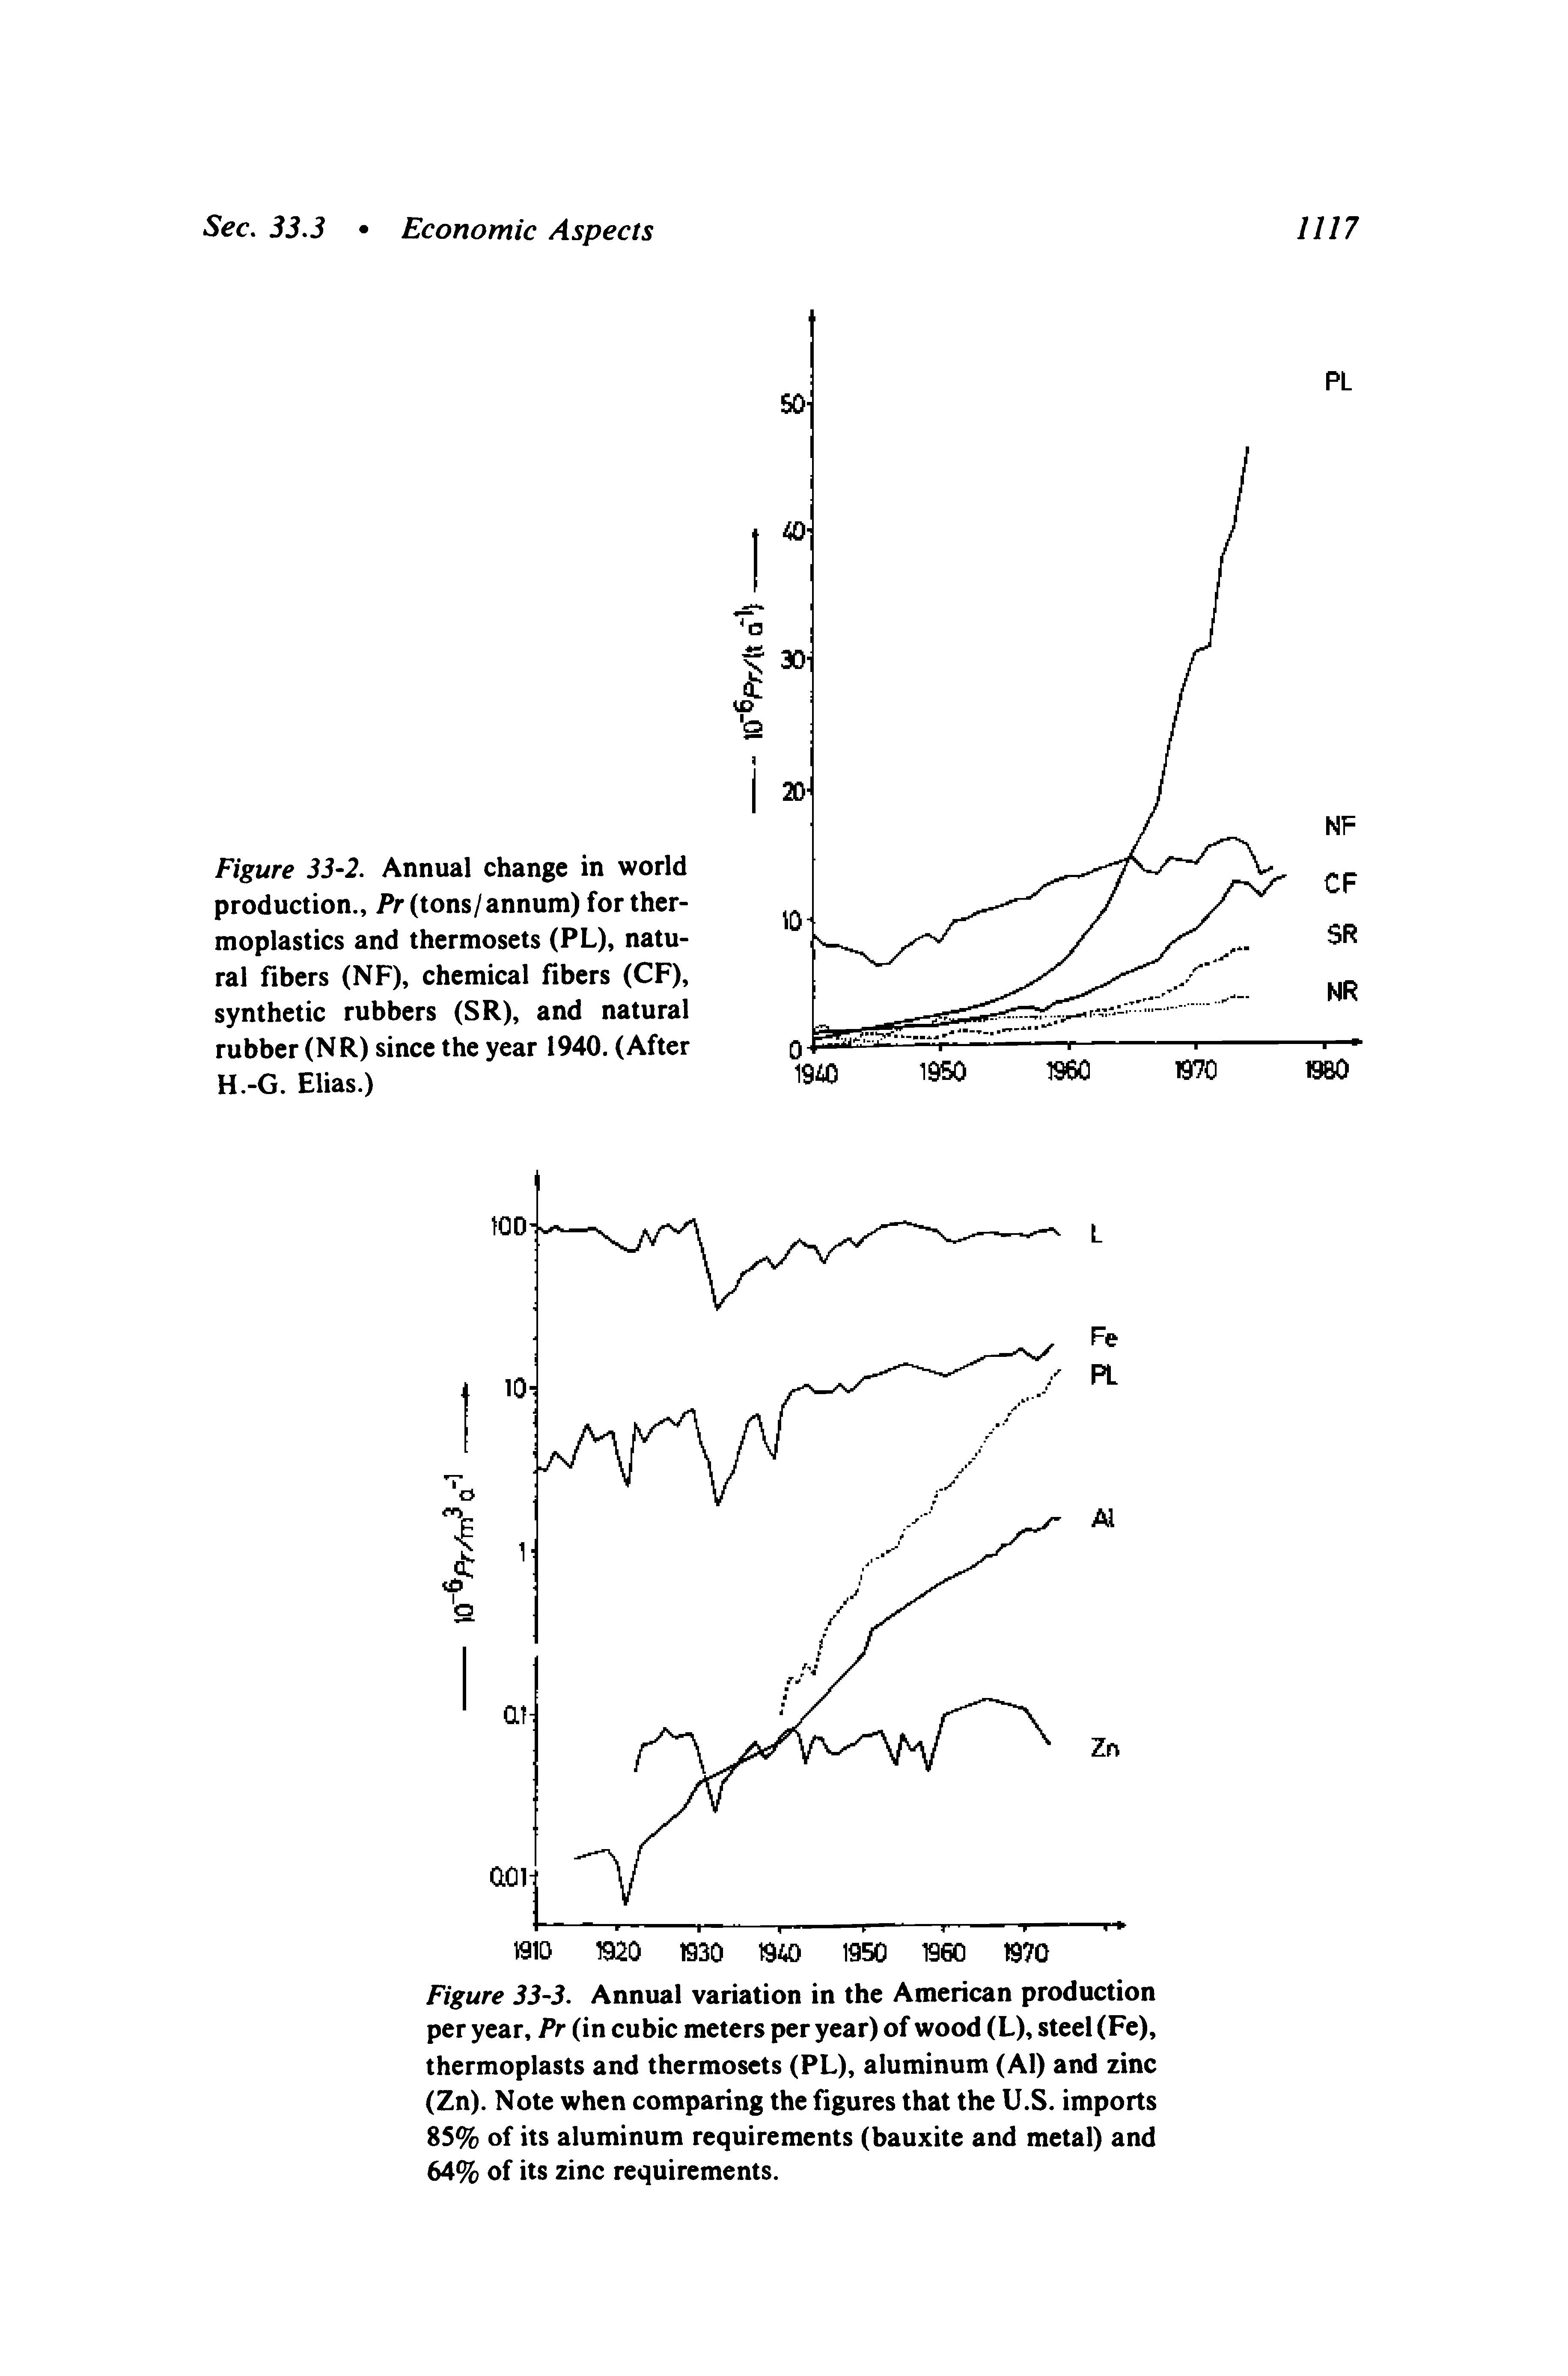 Figure 33-2. Annual change in world production., Pr (tons/annum) for thermoplastics and thermosets (PL), natural fibers (NF), chemical fibers (CF), synthetic rubbers (SR), and natural rubber (NR) since the year 1940. (After H.-G. Elias.)...